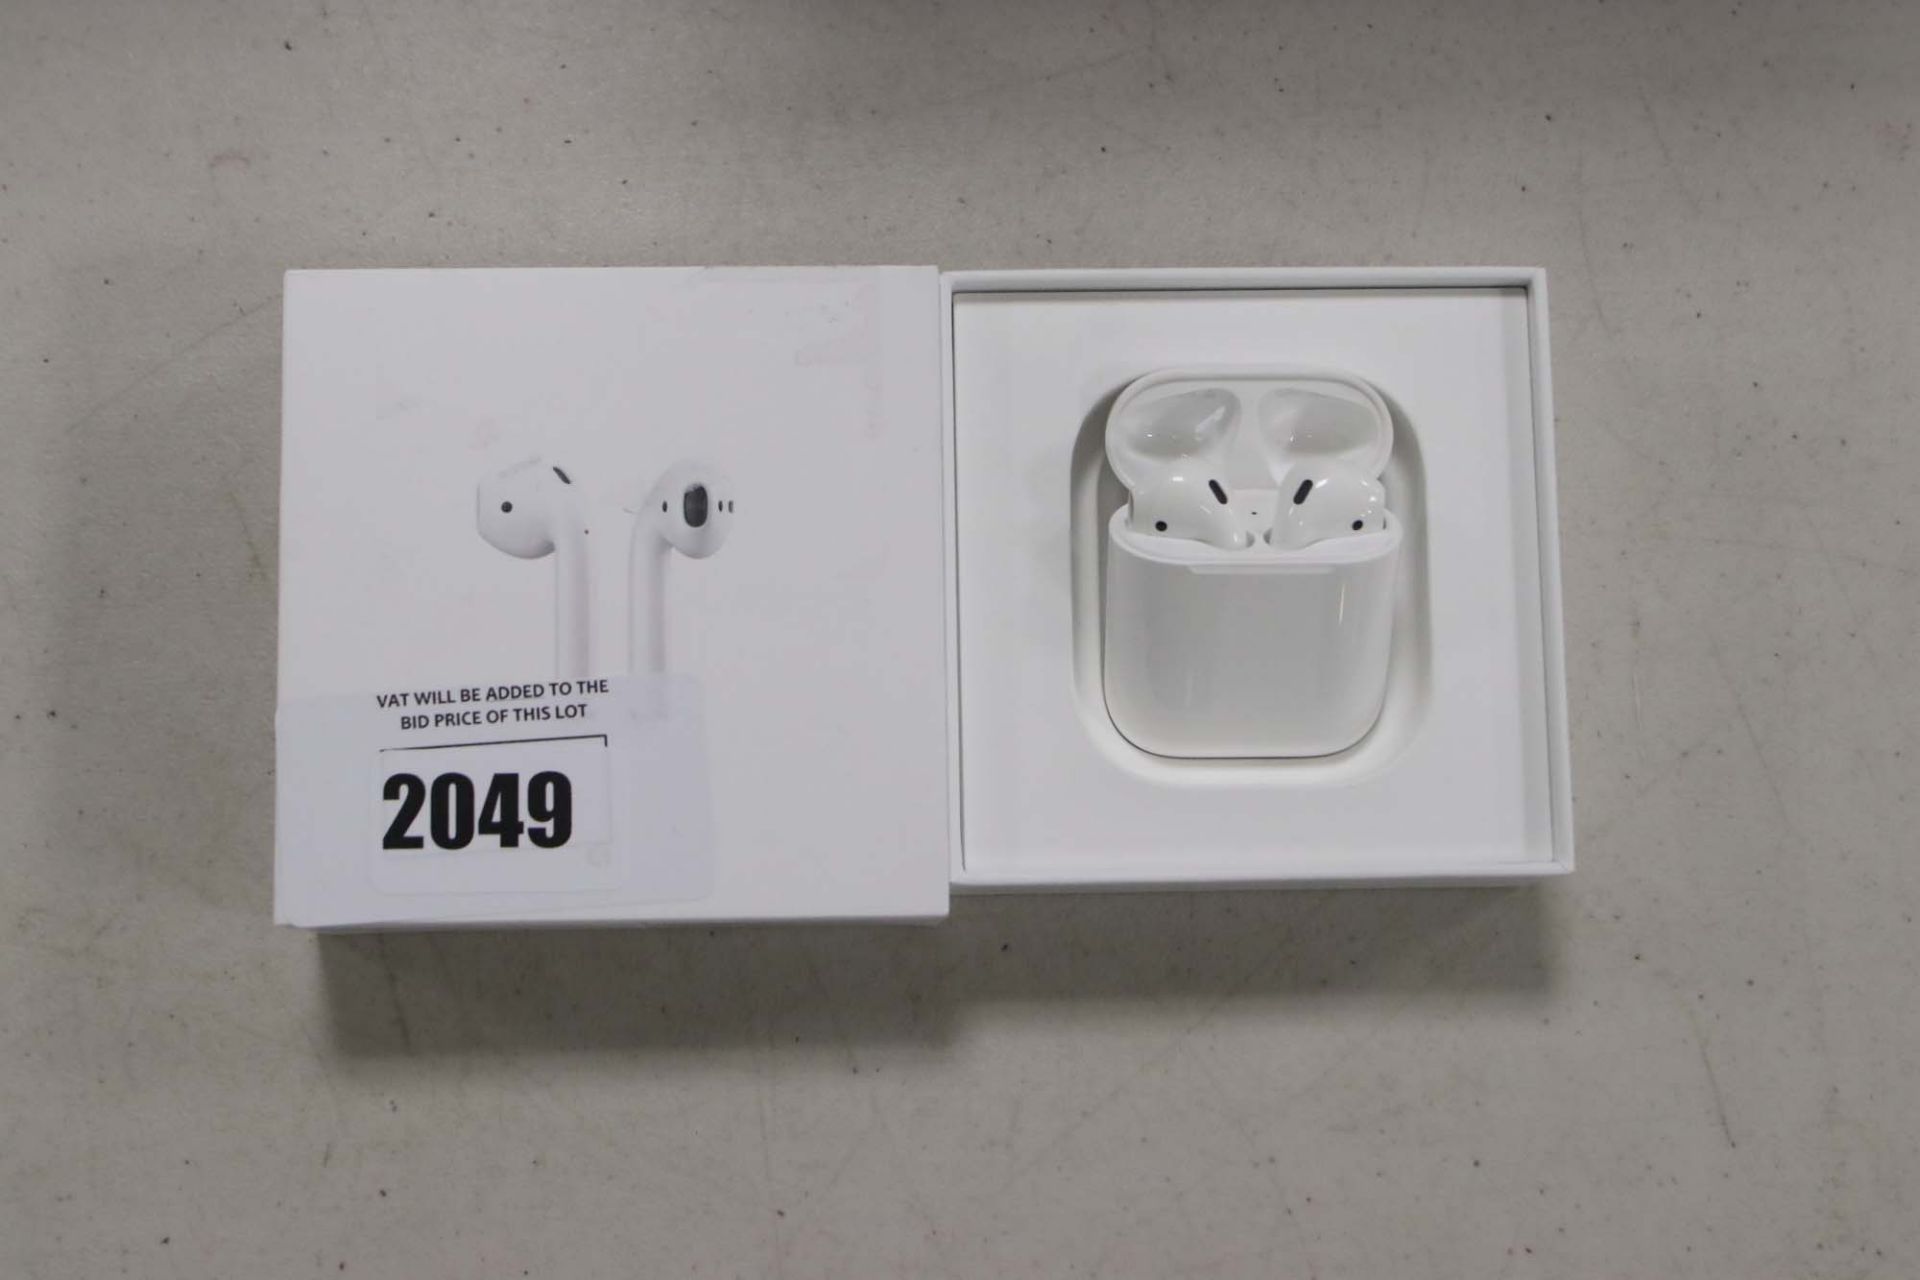 Apple AirPods with wireless charging case and box